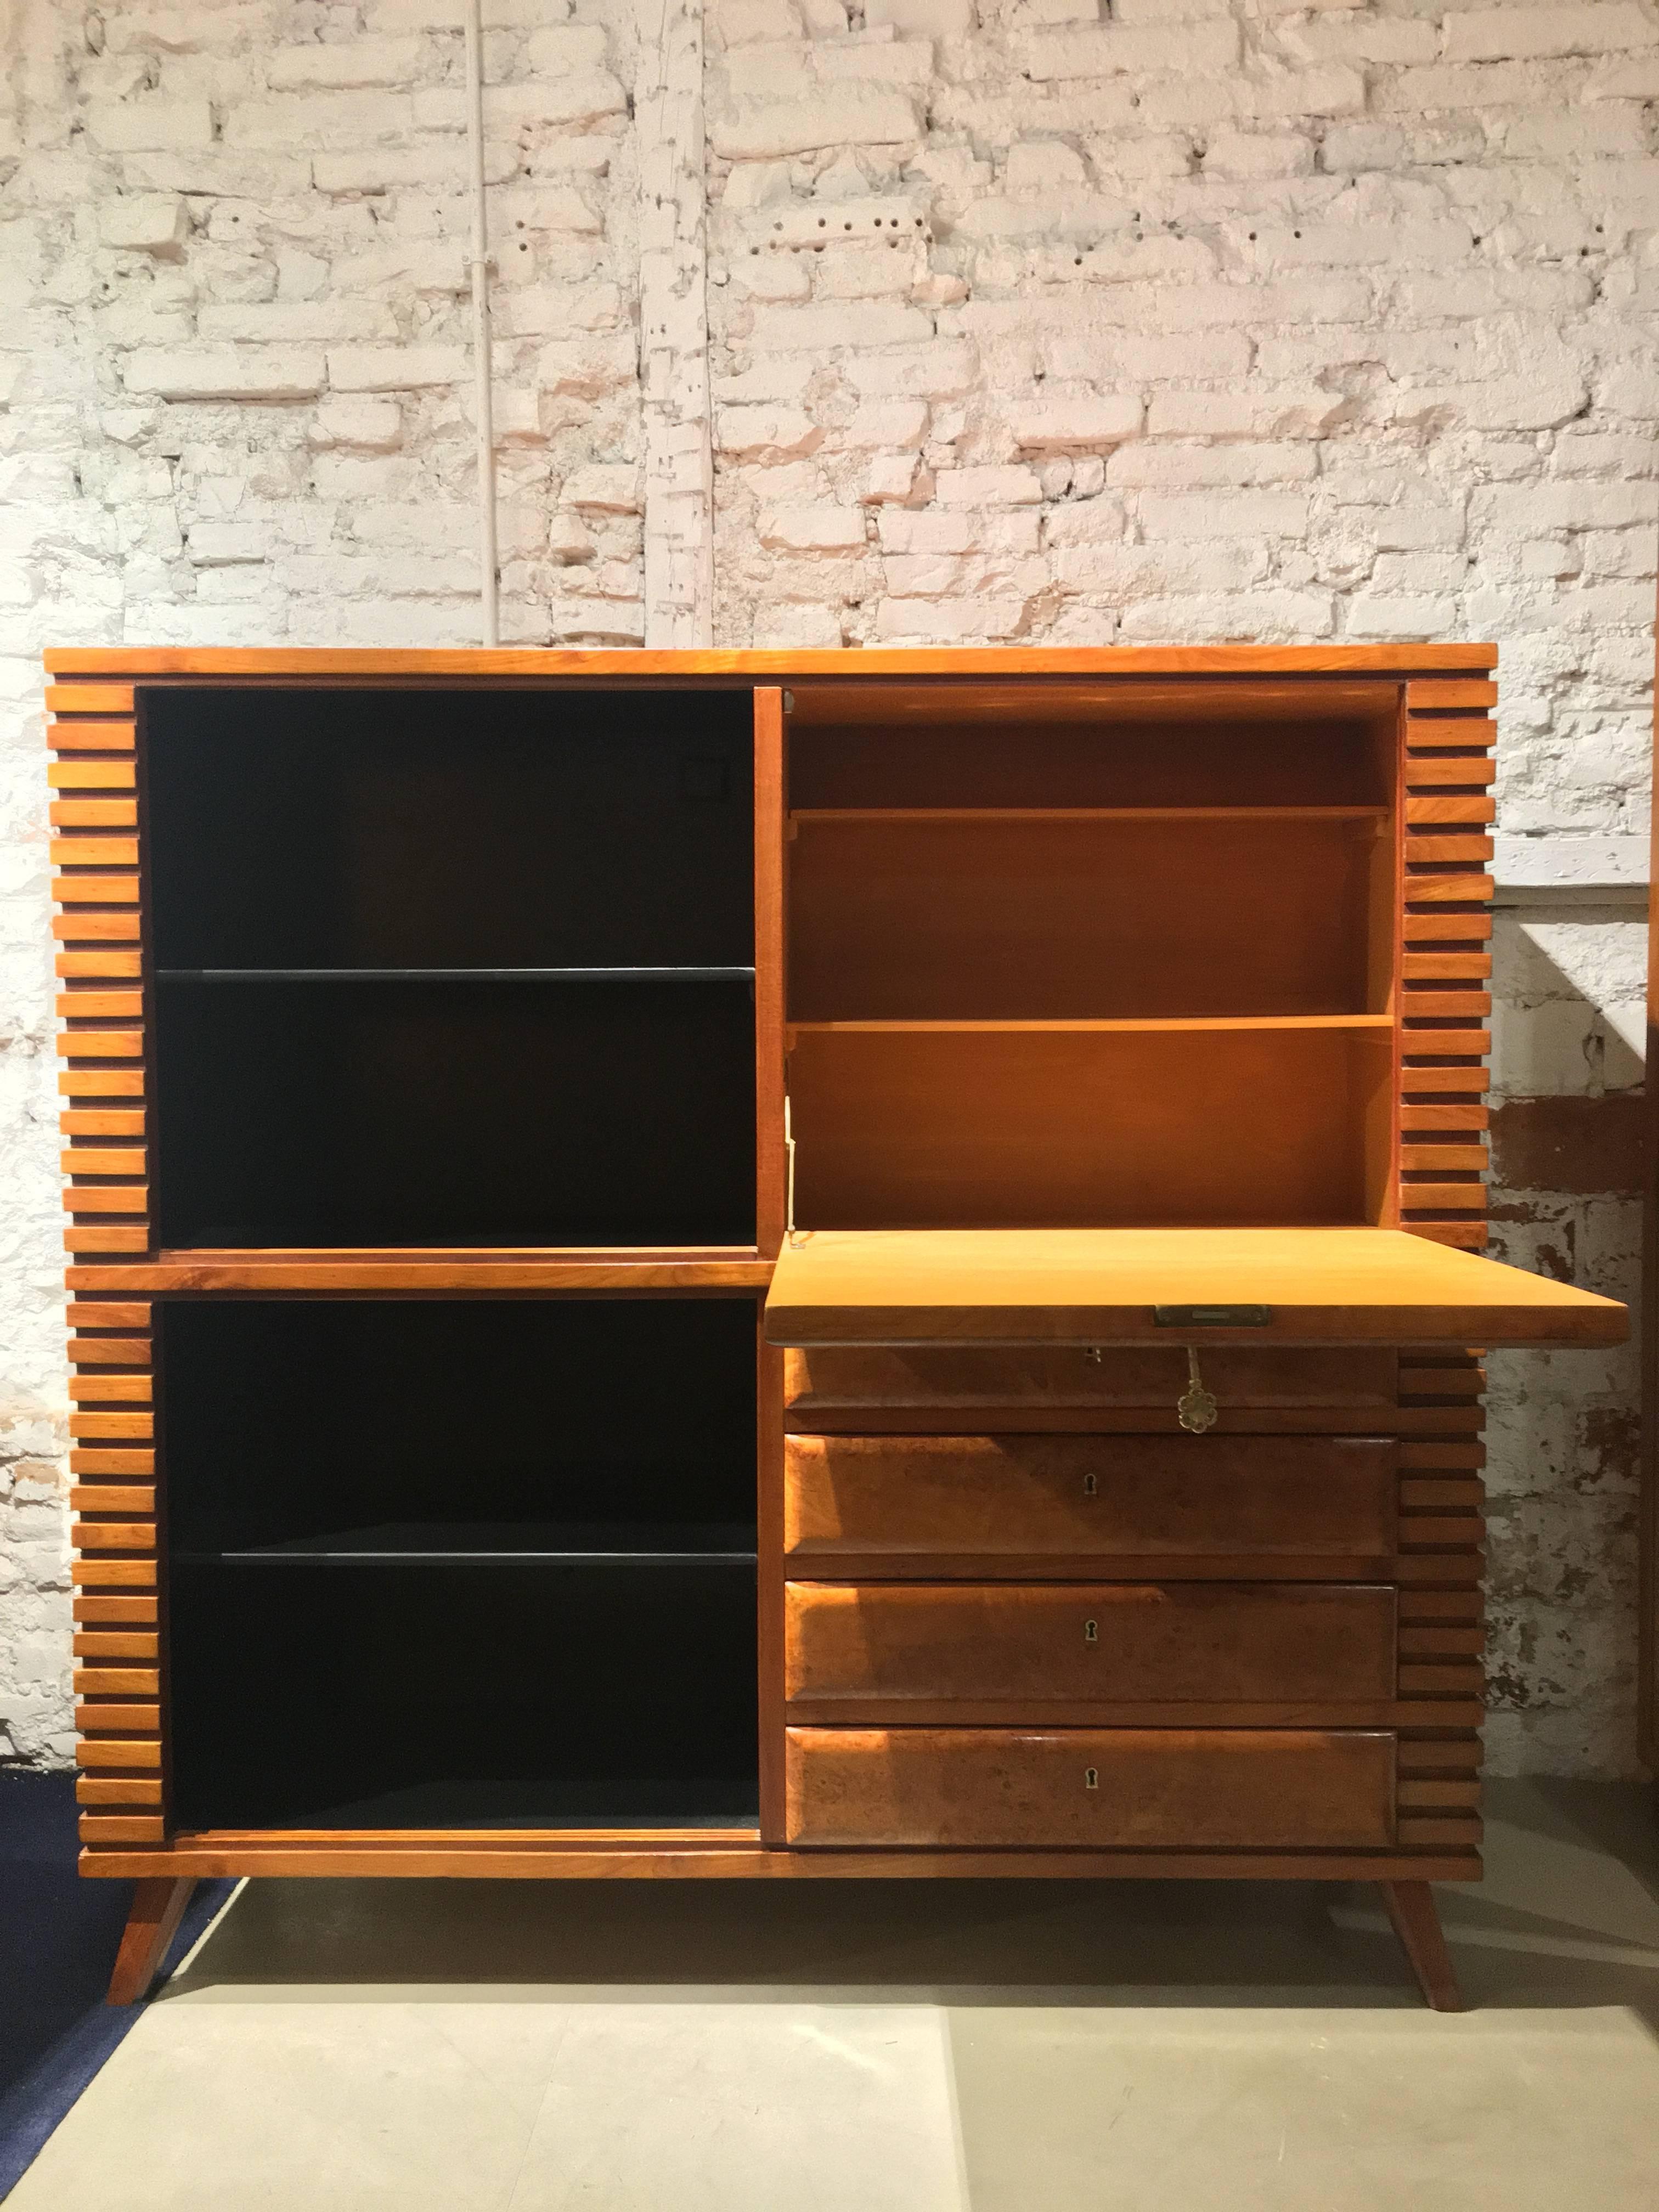 Amazing cabinet secretary bureau, design art deco, 1940 period. Woods: thuja, cherry, mahogany. Four drawers. One folding door. Very capacious. Please take note: in the black part (on the left side) there is a a cap on the hole because of in the